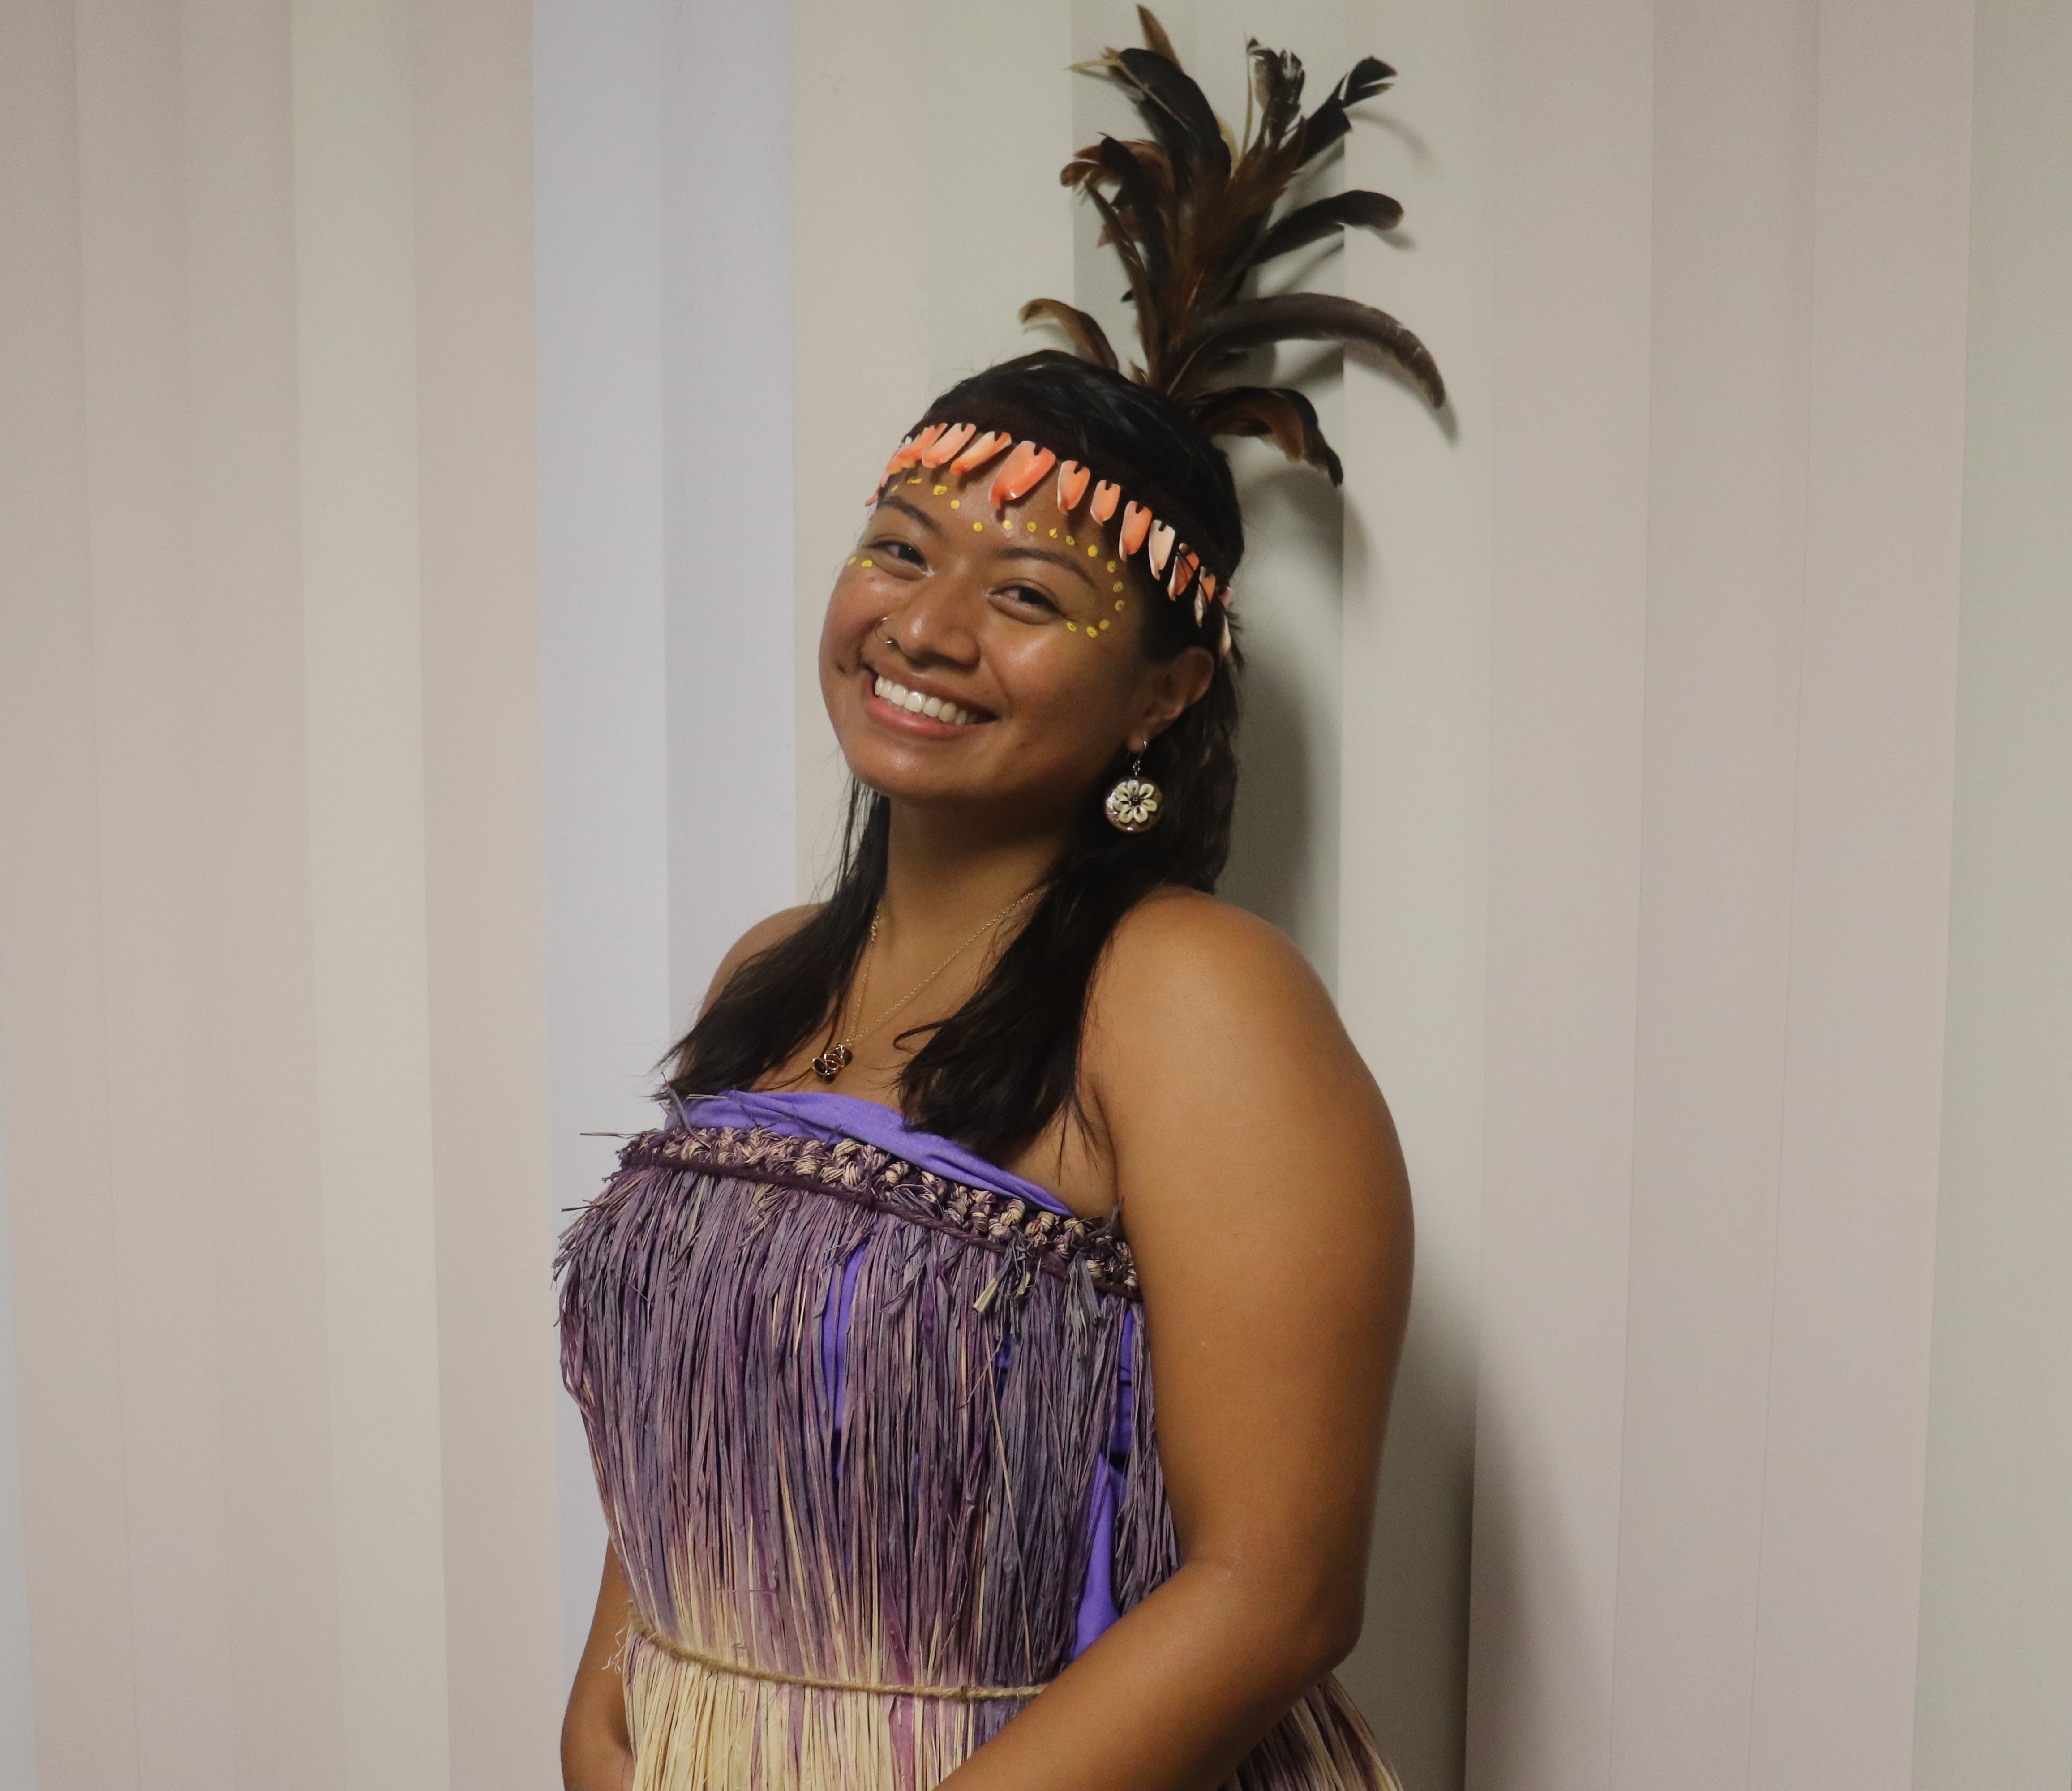 Mio smiles while dressed in traditional Papua New Guinean attire